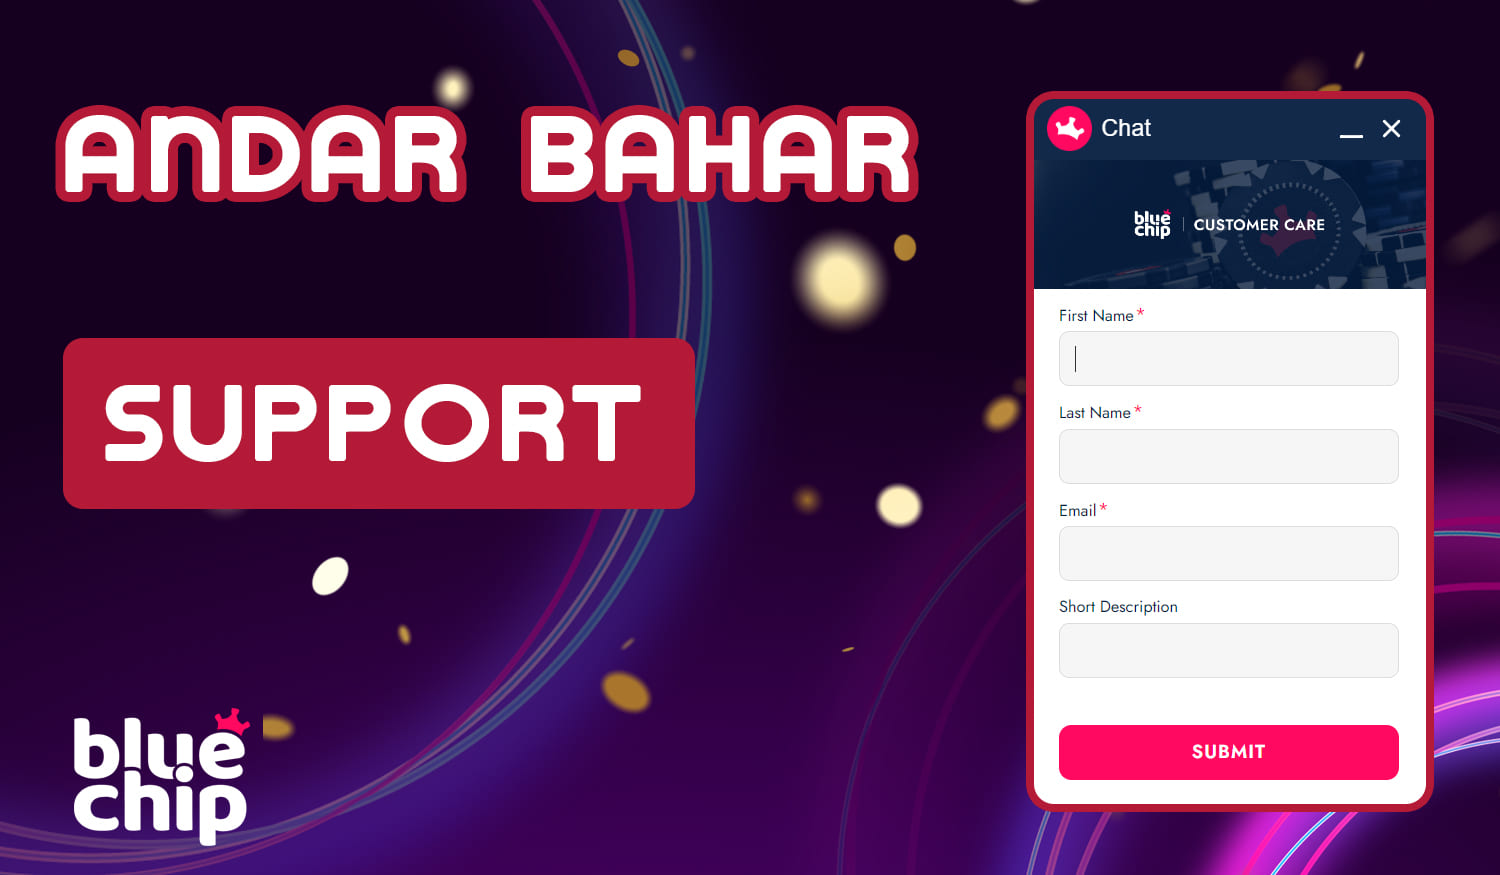 BlueChip support service for Andar Bahar fans from India